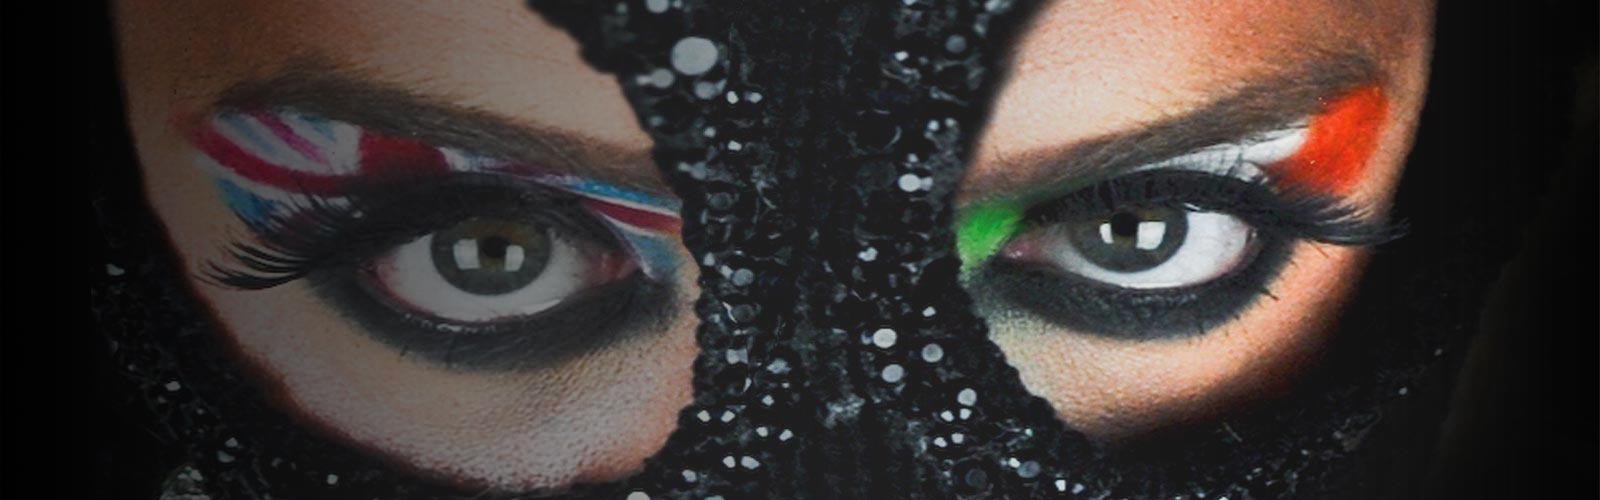 Close up image of a person wearing a balaclava with eye makeup of the United Kingdom and Ireland flags